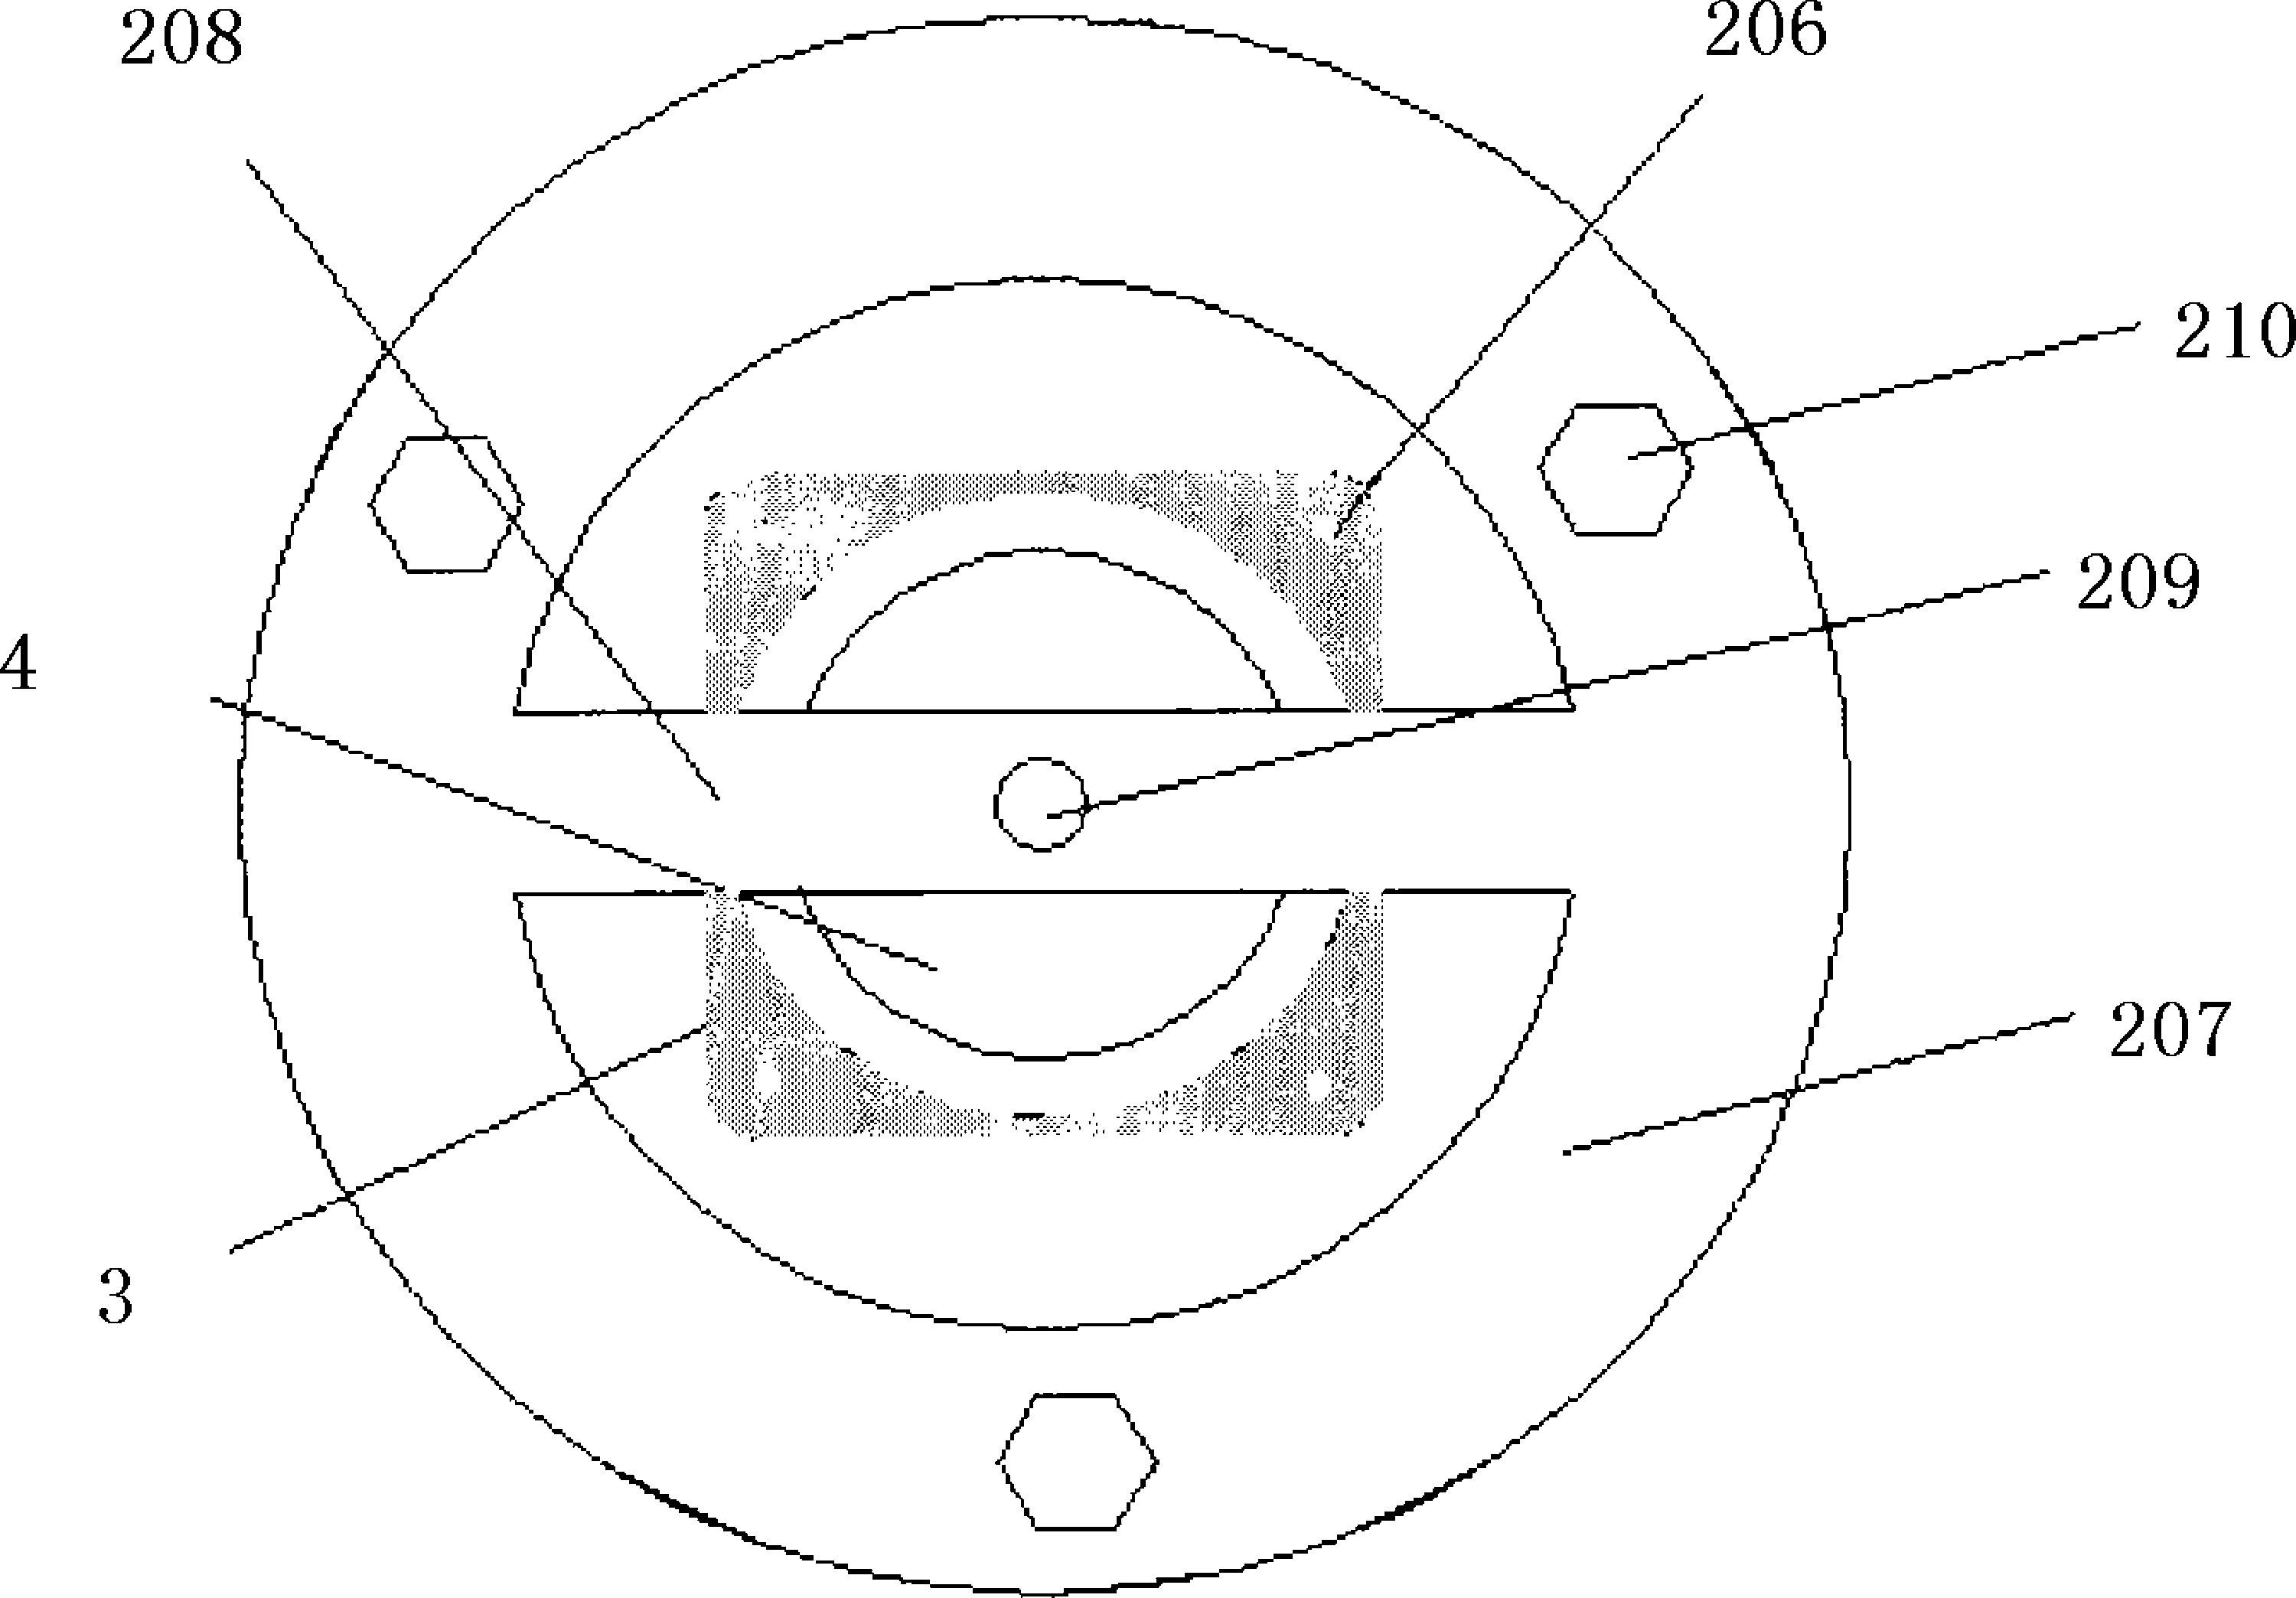 Adhesive heating and temperature control device used in accelerometer assembling process